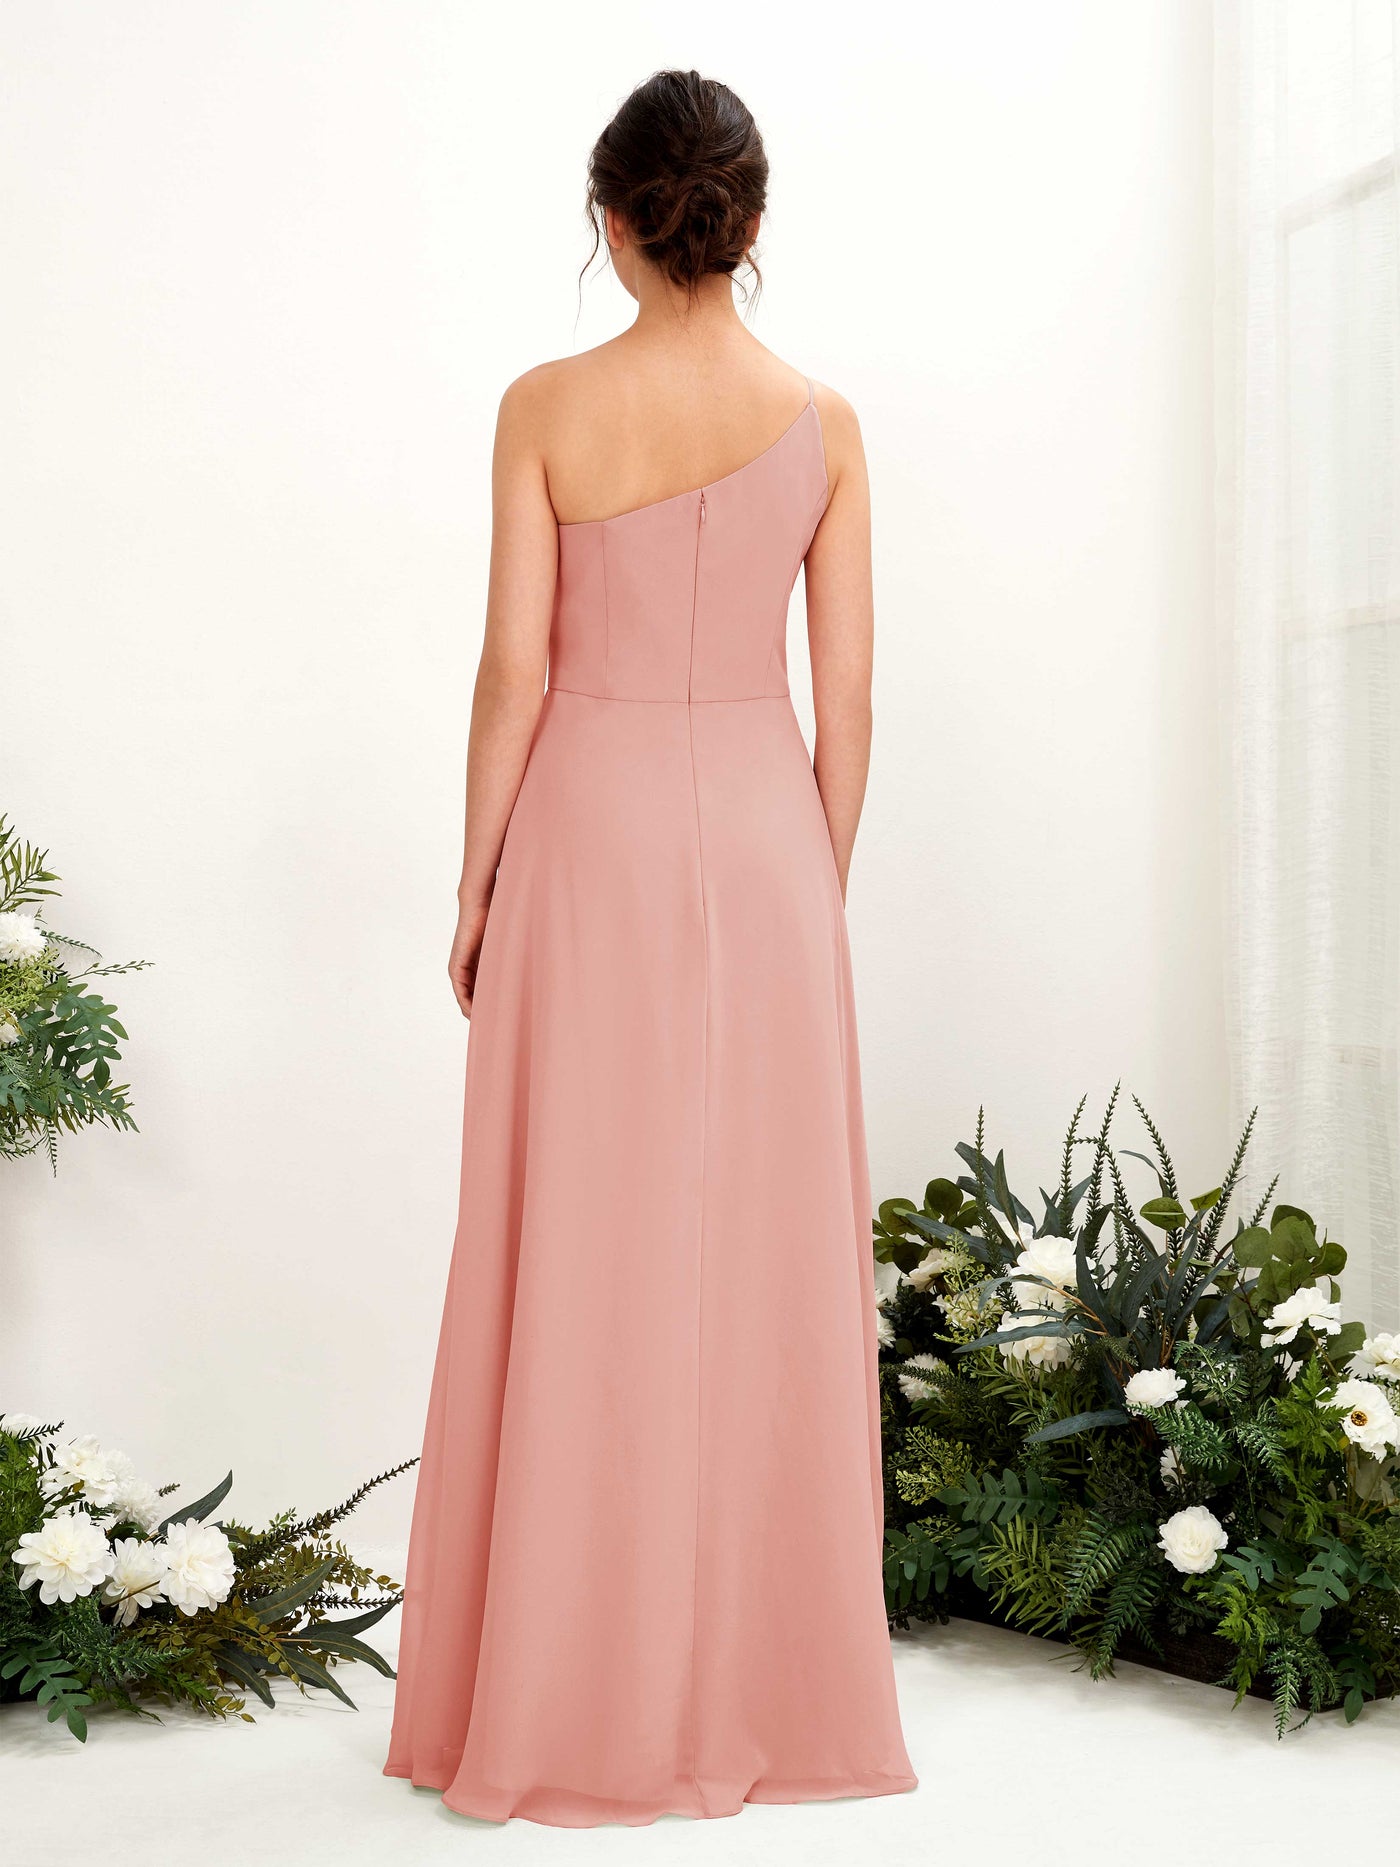 Champagne Rose Bridesmaid Dresses Bridesmaid Dress A-line Chiffon One Shoulder Full Length Sleeveless Wedding Party Dress (81225706)#color_champagne-rose